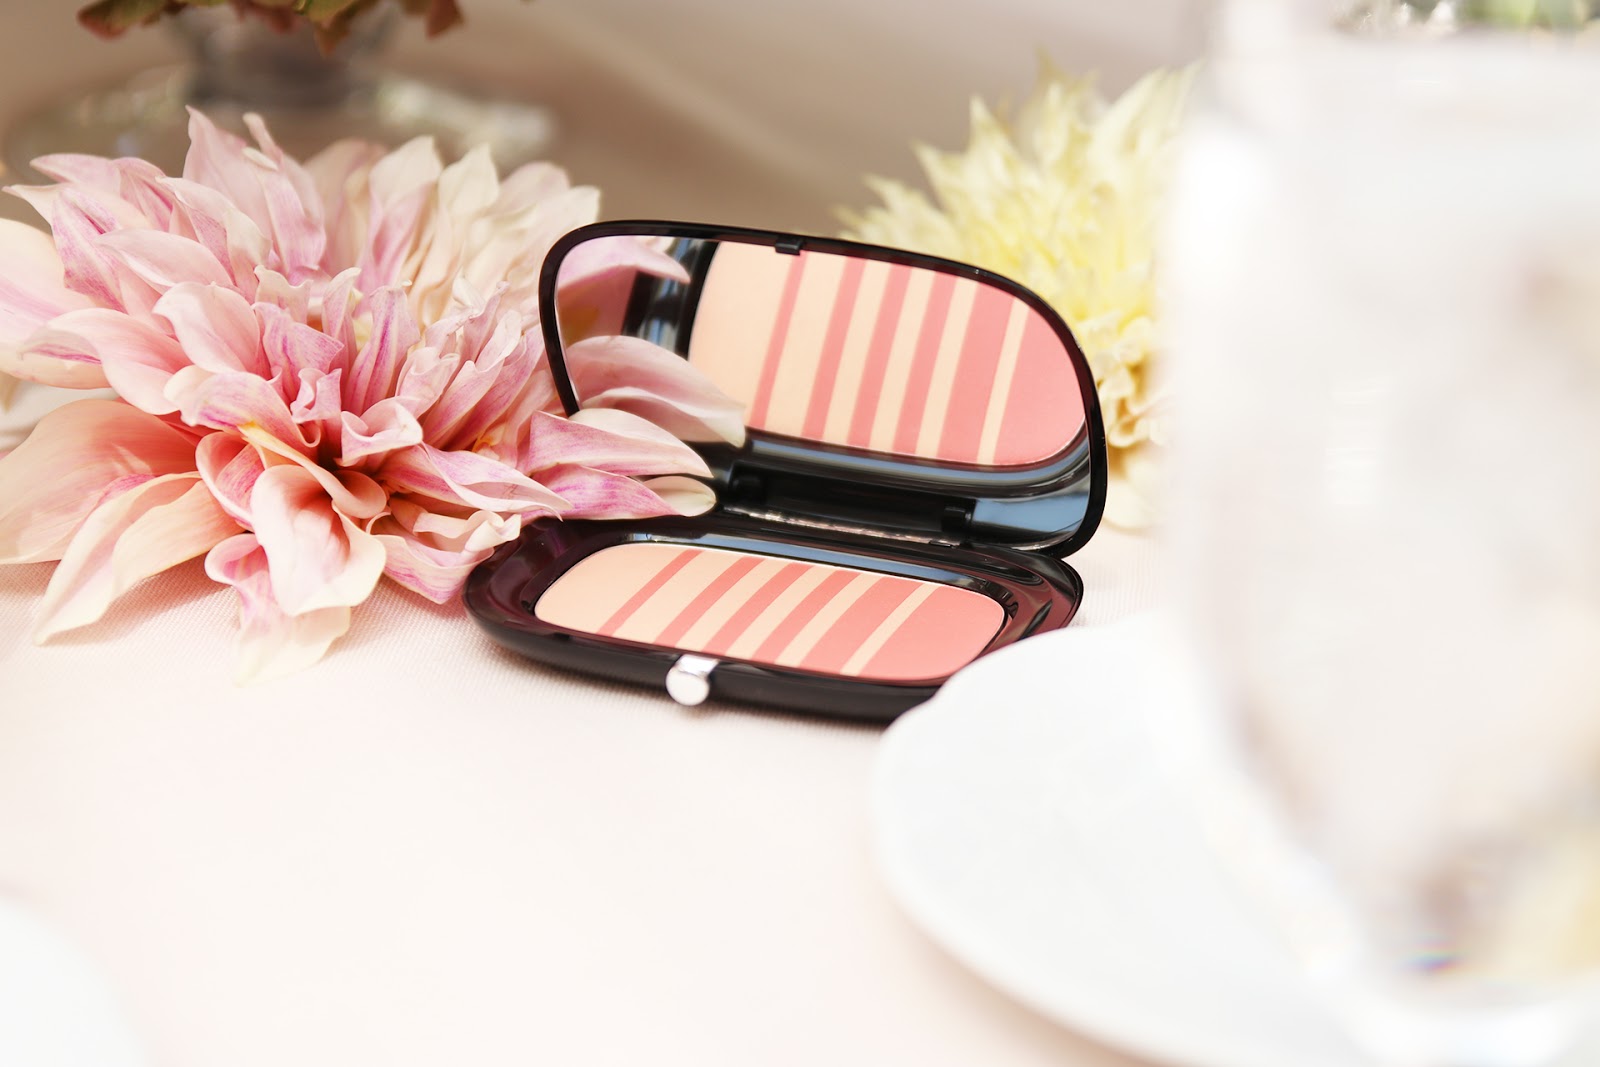 The Marc Jacobs Beauty Airblush Duo Launch